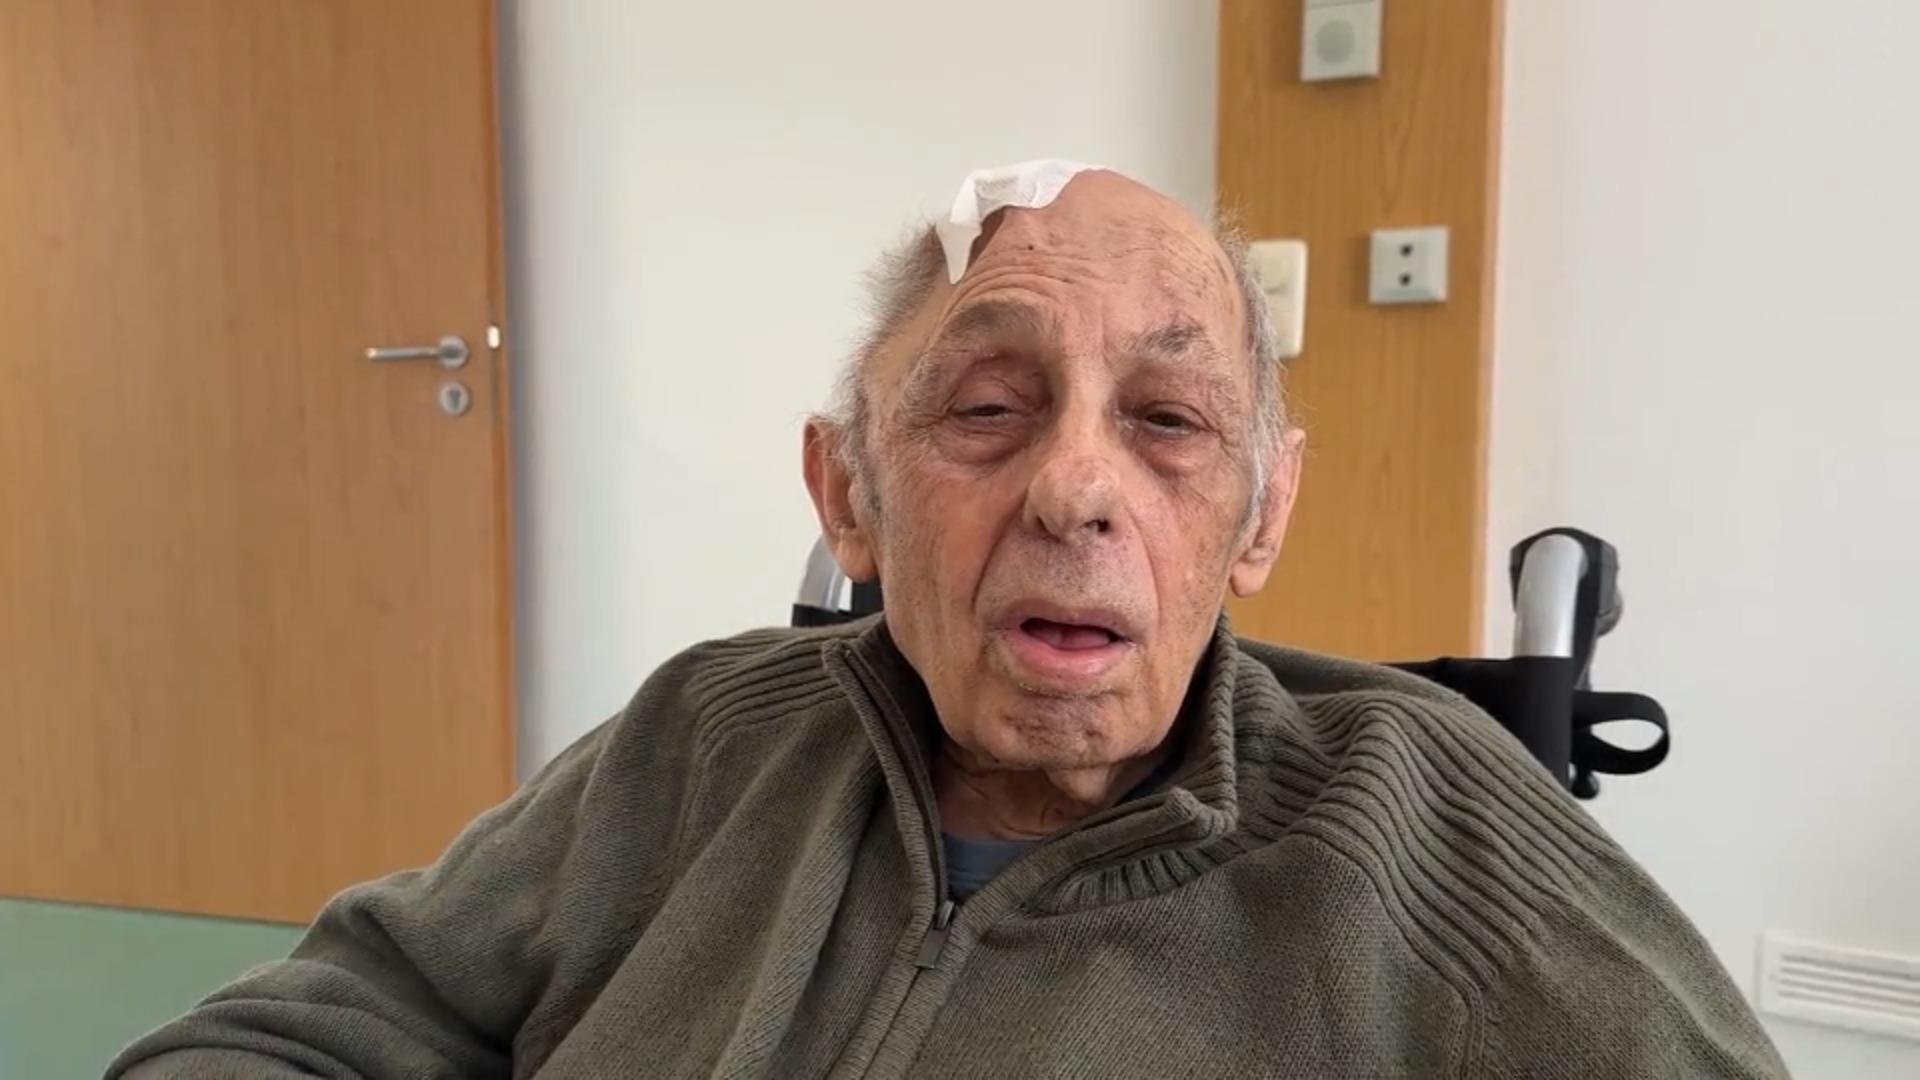 Kosta, a pensioner who was hit in the skull with a baseball bat, is now in need of care